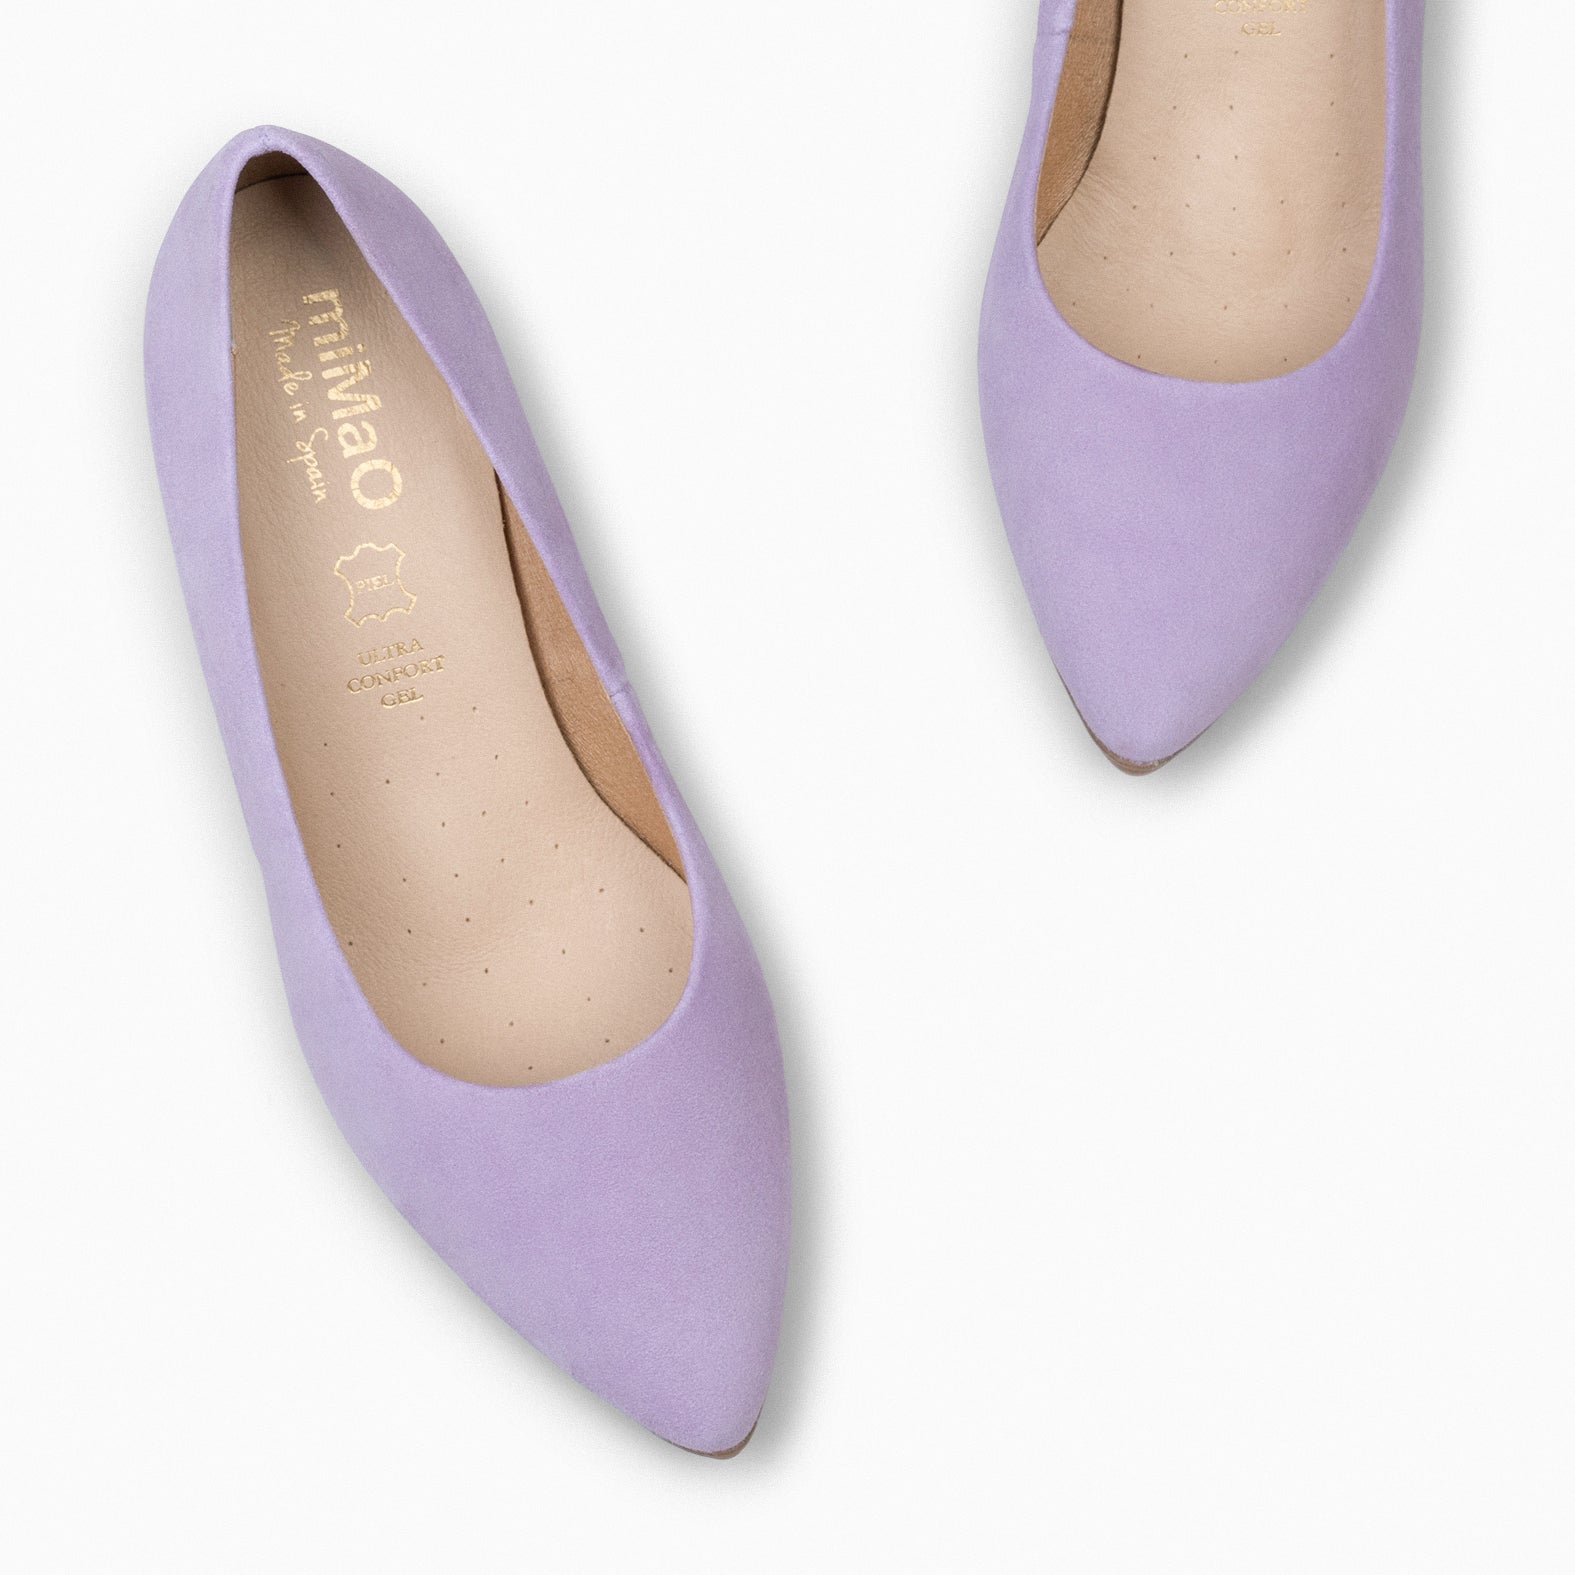 URBAN S – LILAC Suede Mid-Heeled Shoes 